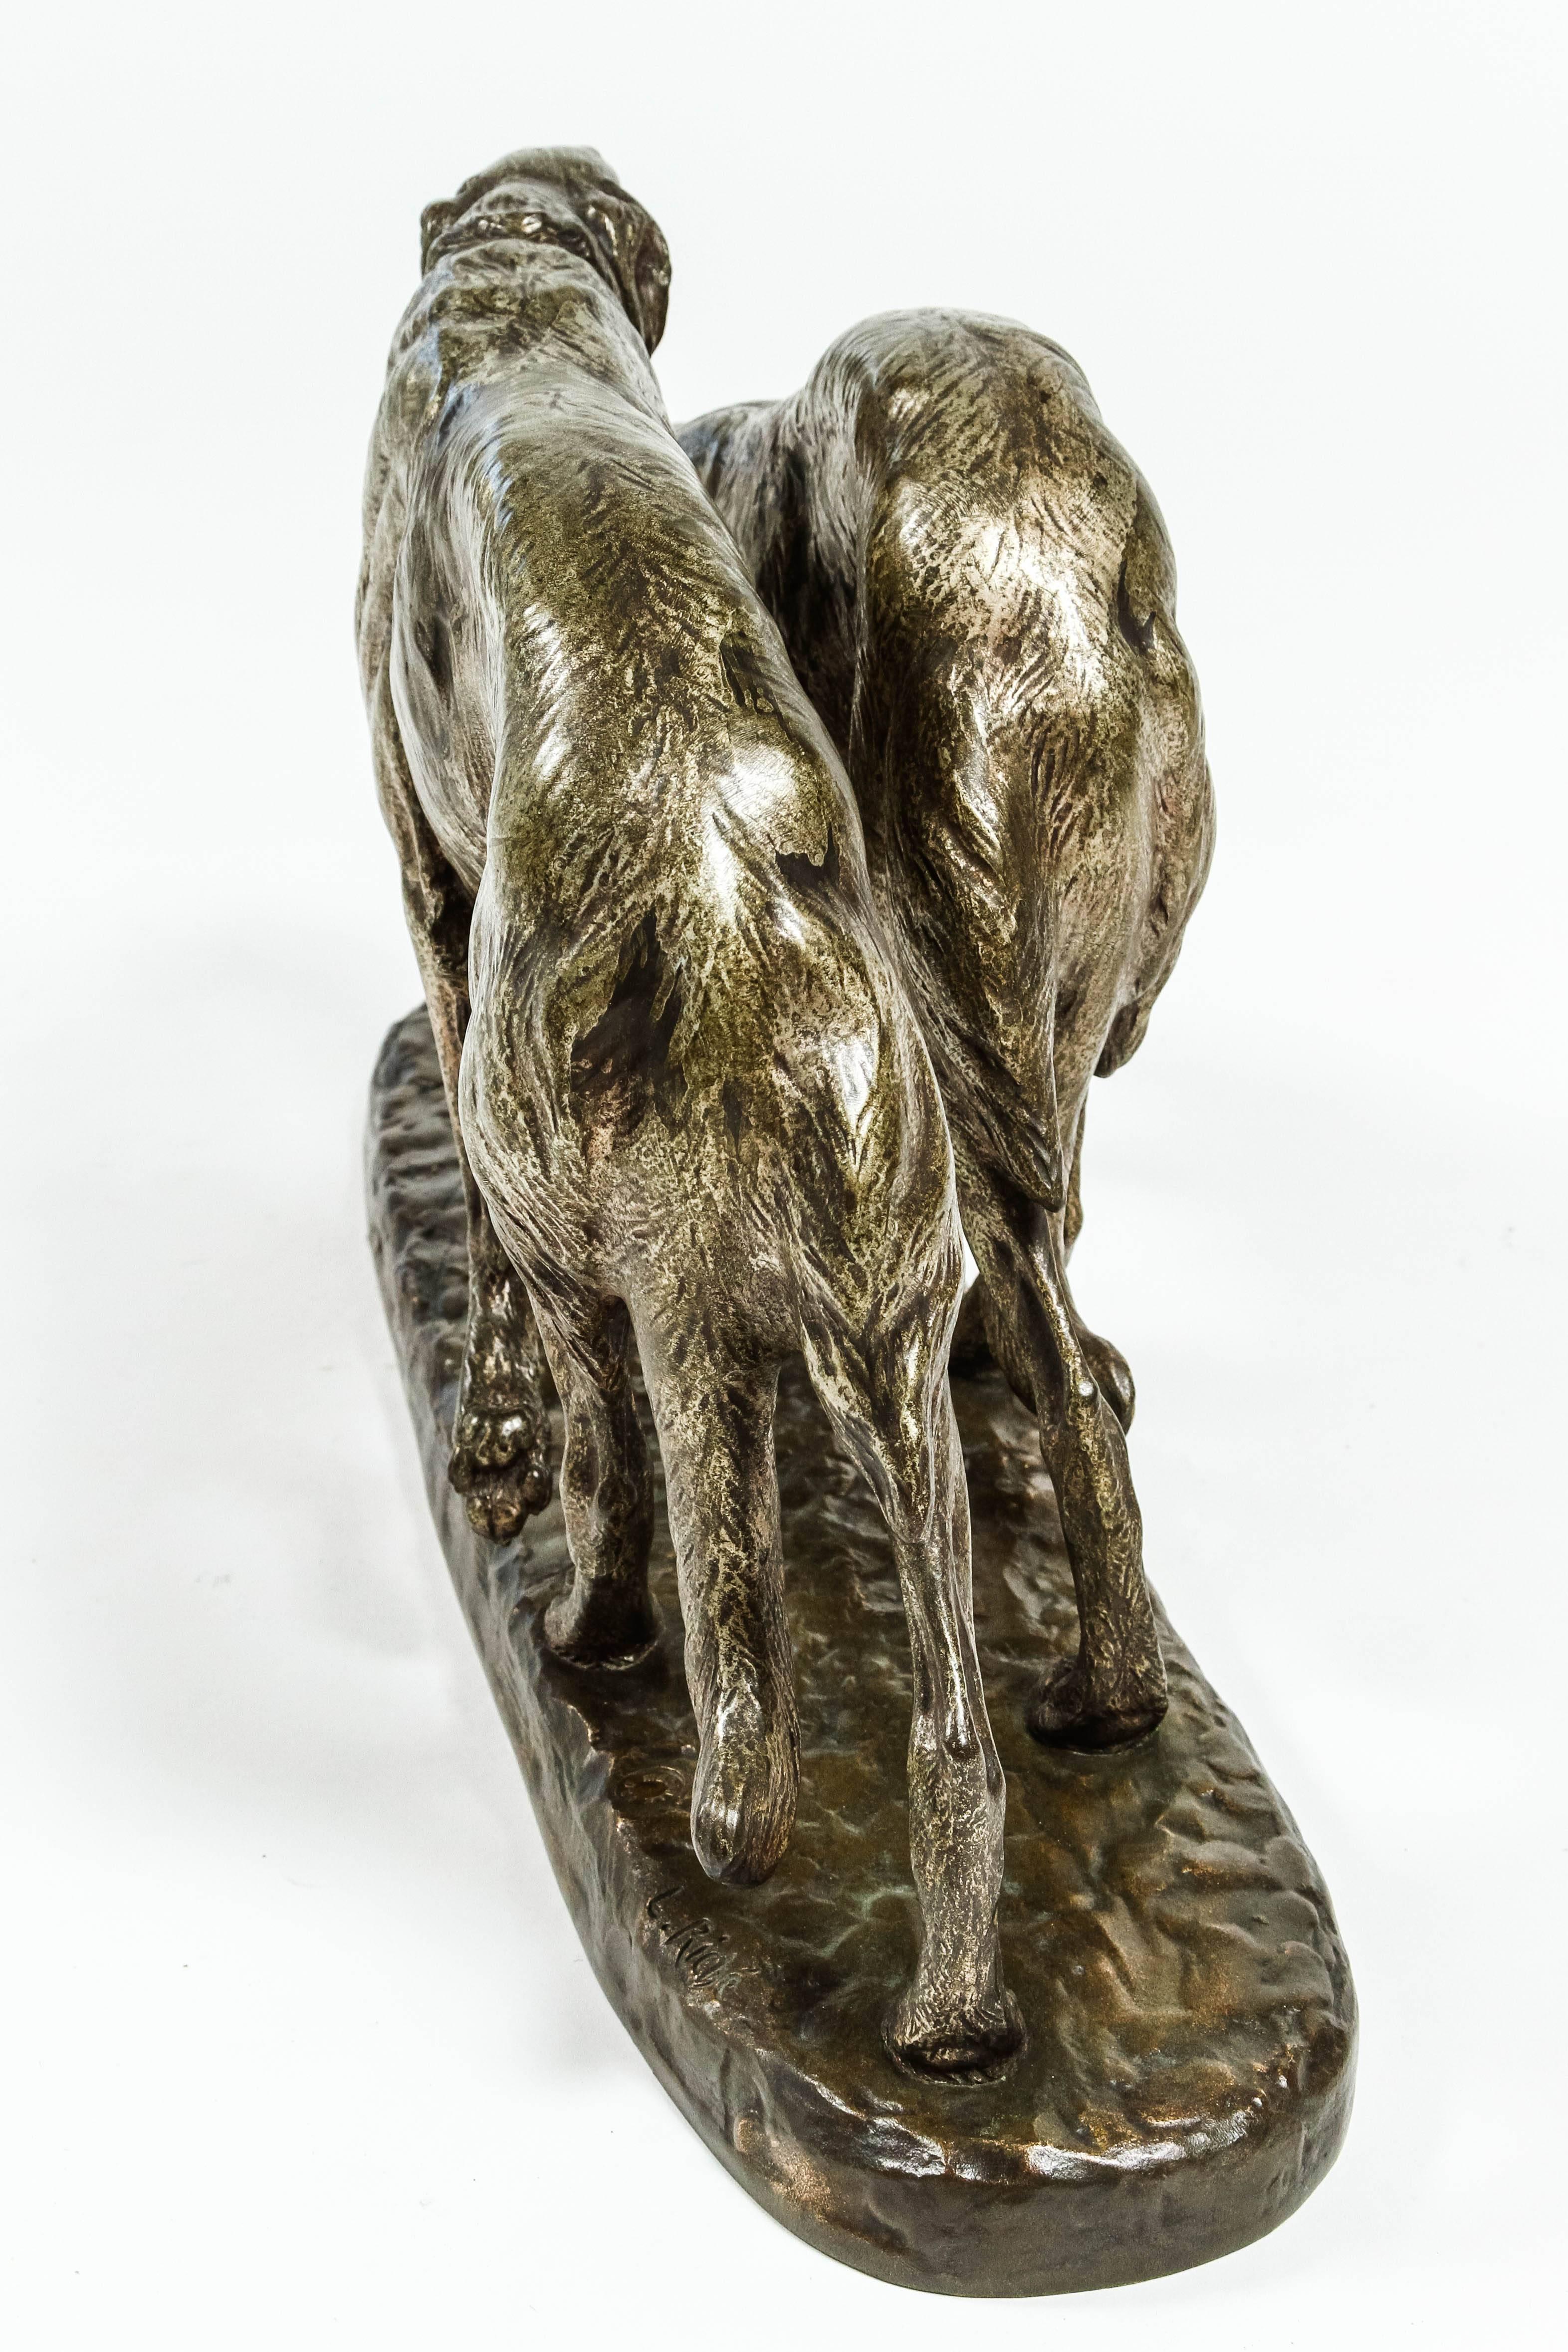 A large and impressive bronze of two Russian wolf hounds cast in bronze. The dogs retain most of their silvered finish and the ground they are walking on is patinated bronze. In addition to the artist's signature this bronze is further marked: